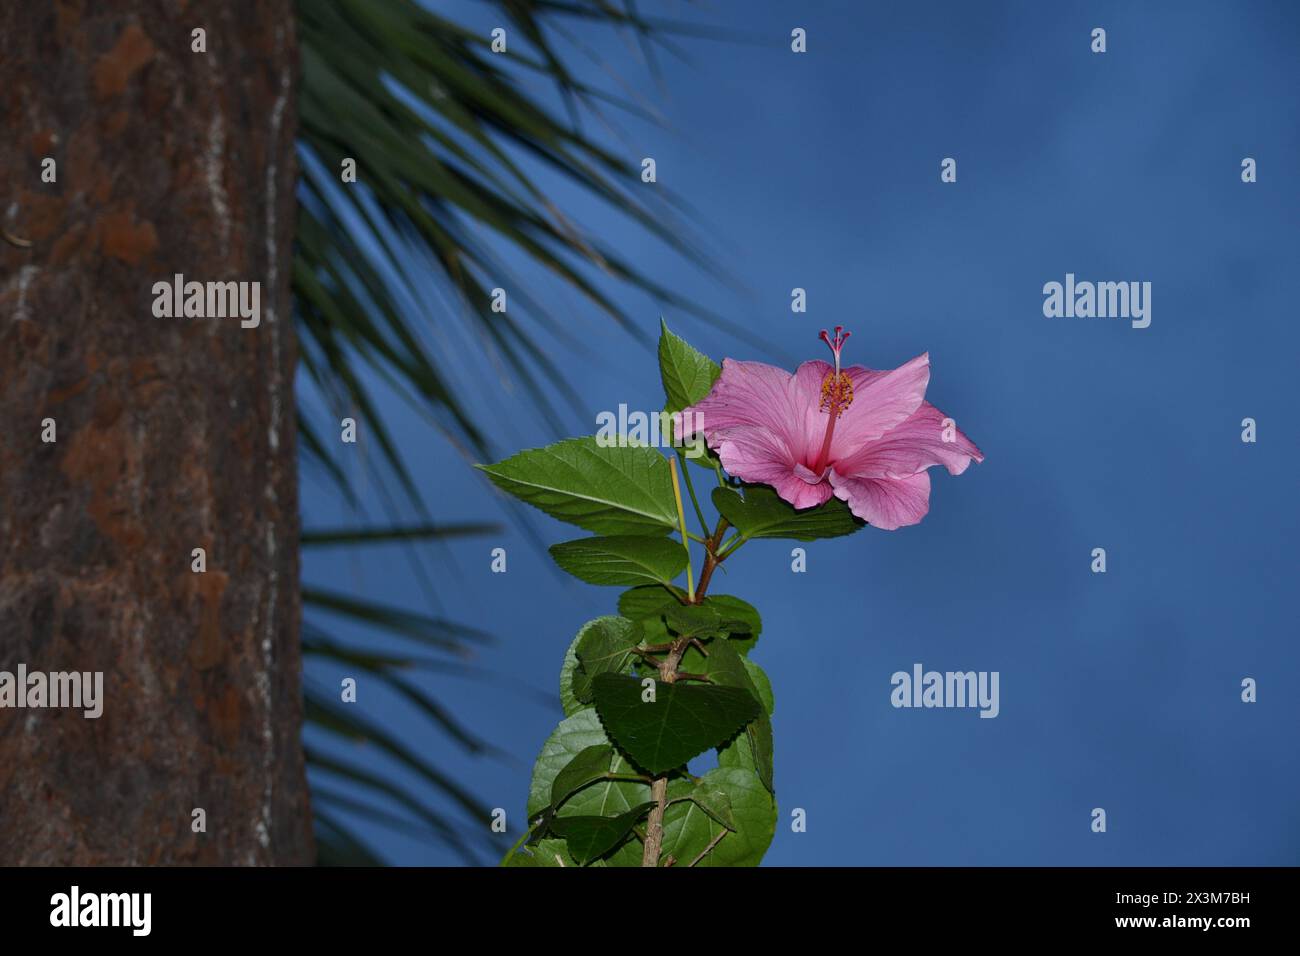 A beautiful pink hibiscus flower contrasts with the blue hues of the evening sky, while pine and palm trees form a serene backdrop. Stock Photo